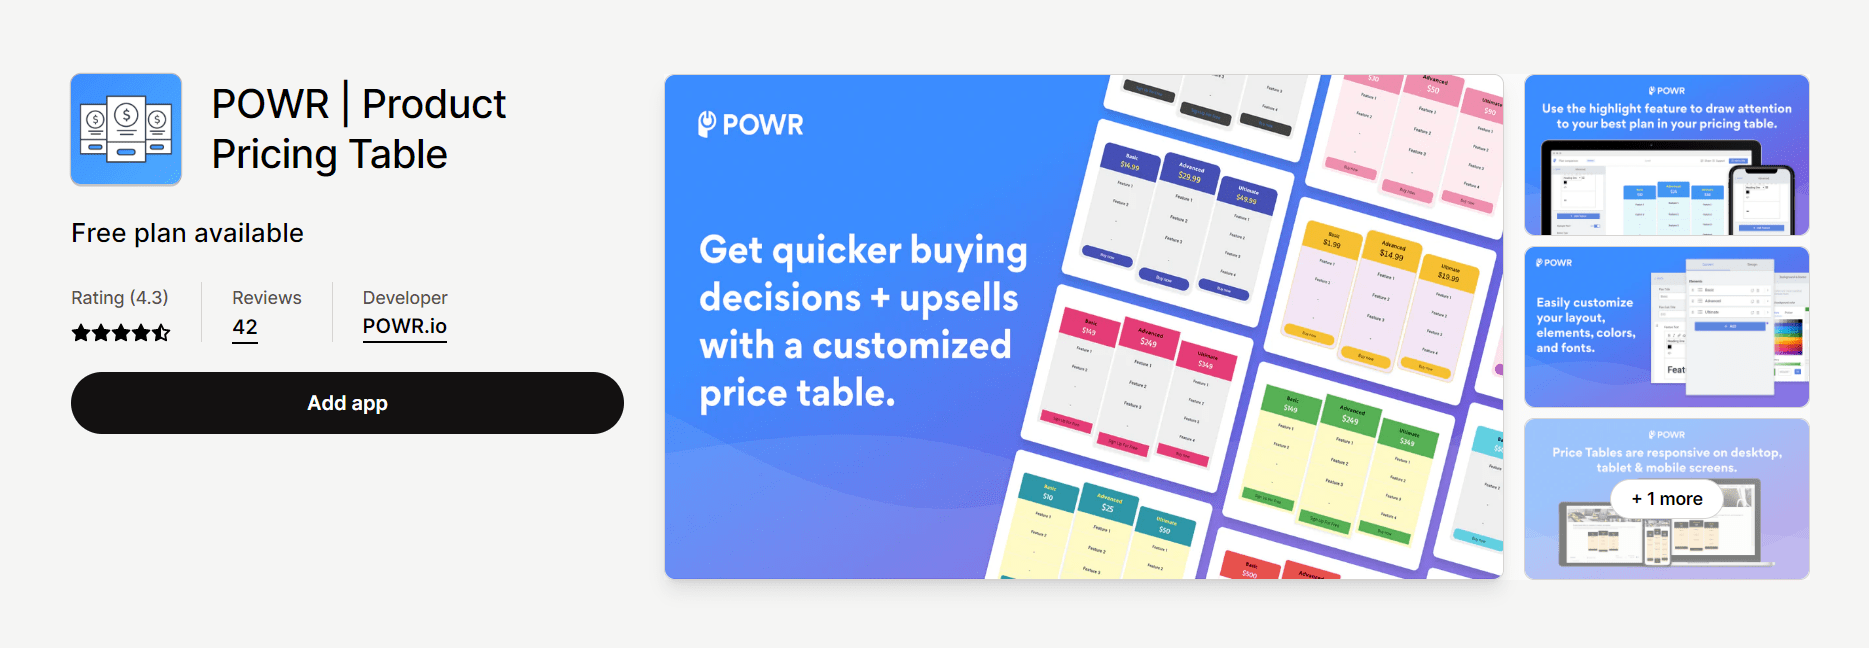 POWR Product Pricing Table